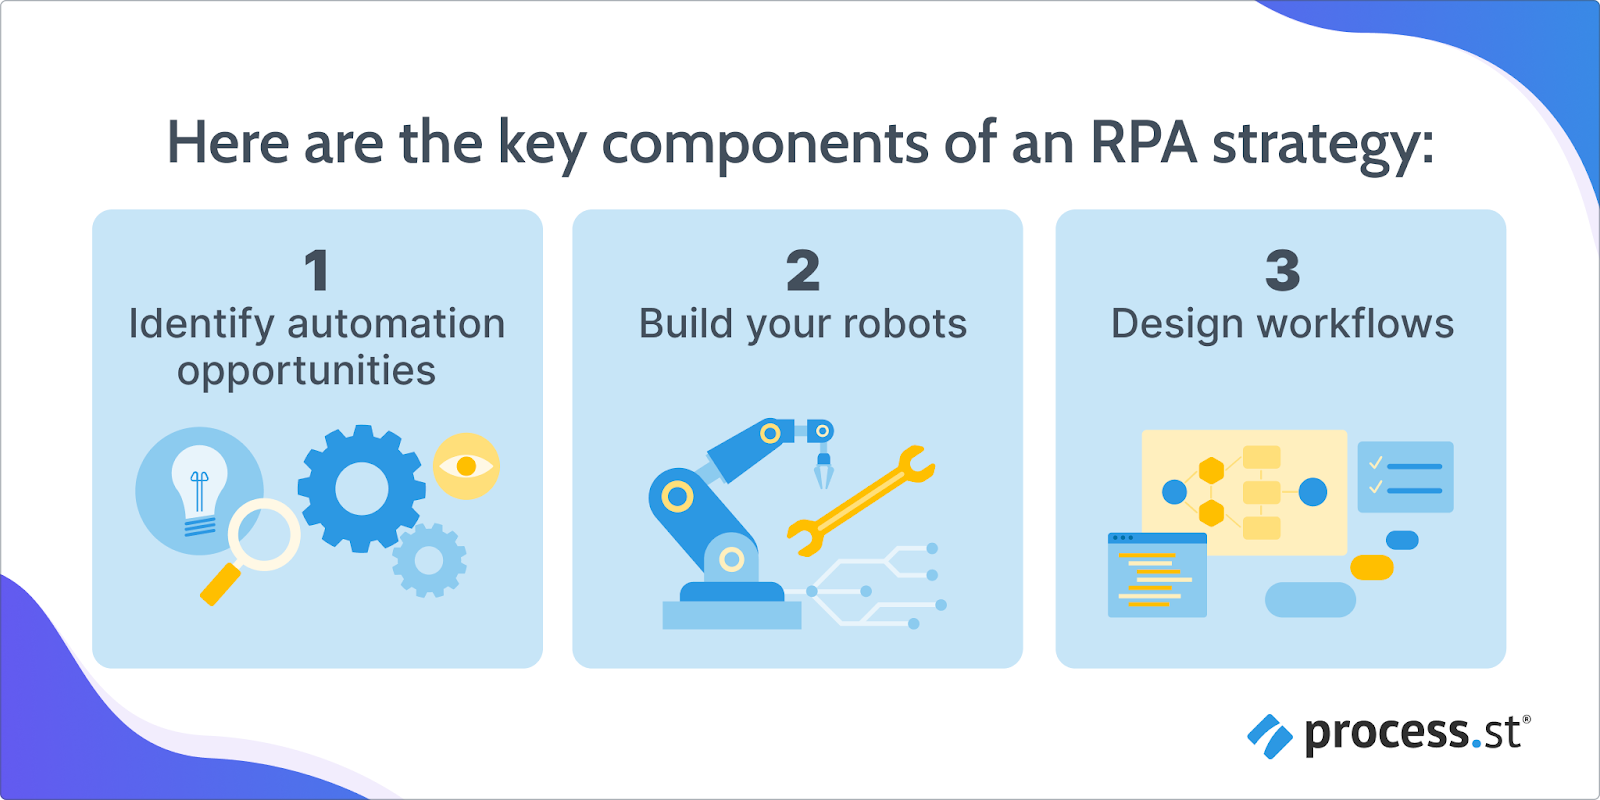 image showing the key components of RPA software